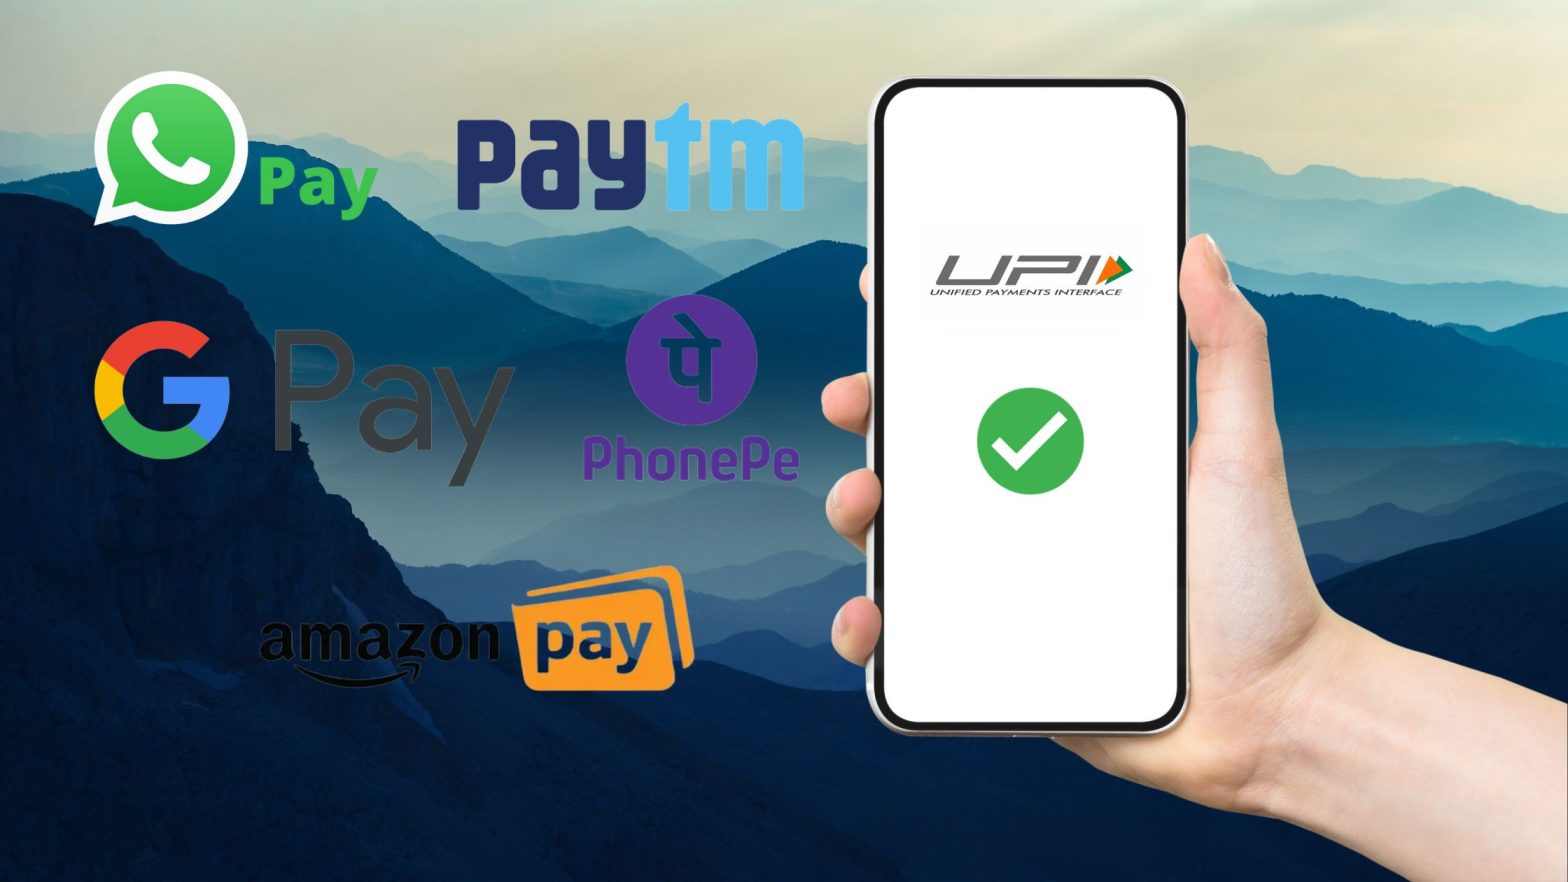 The image shows a phone making UPI Payments in India